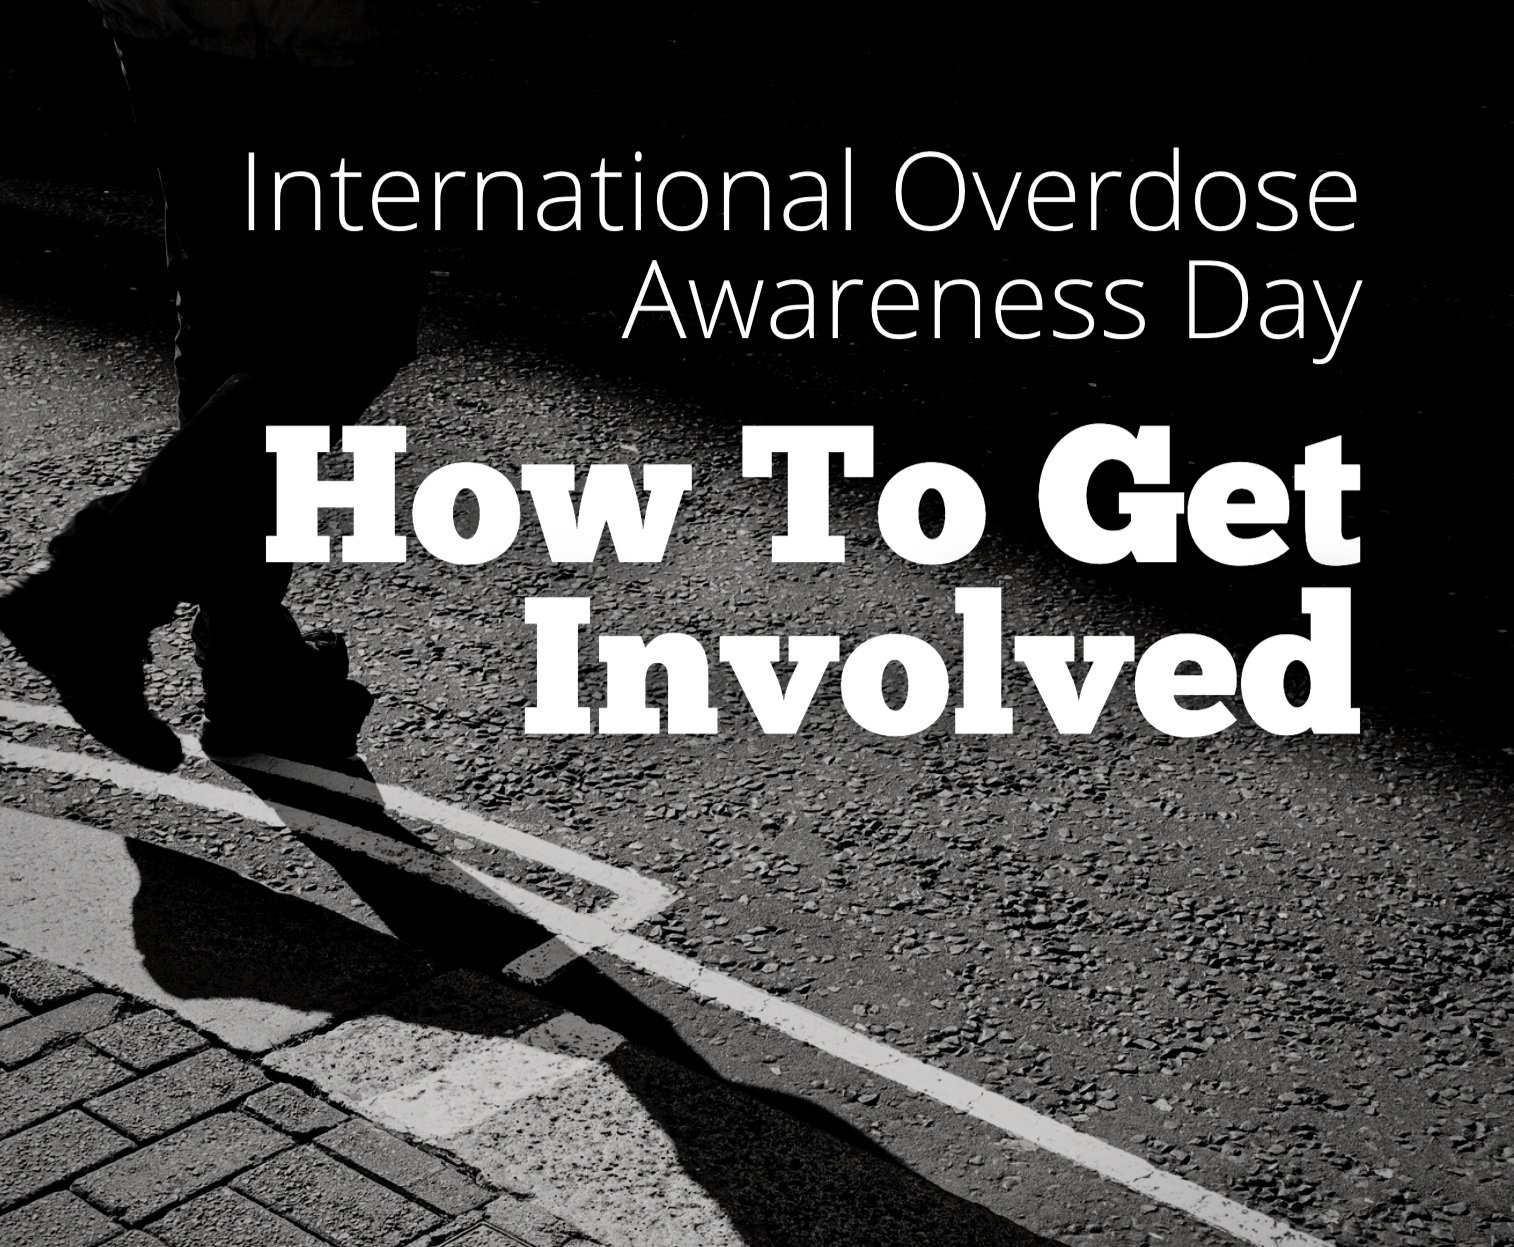 5 Things To Remember This International Overdose Awareness Day